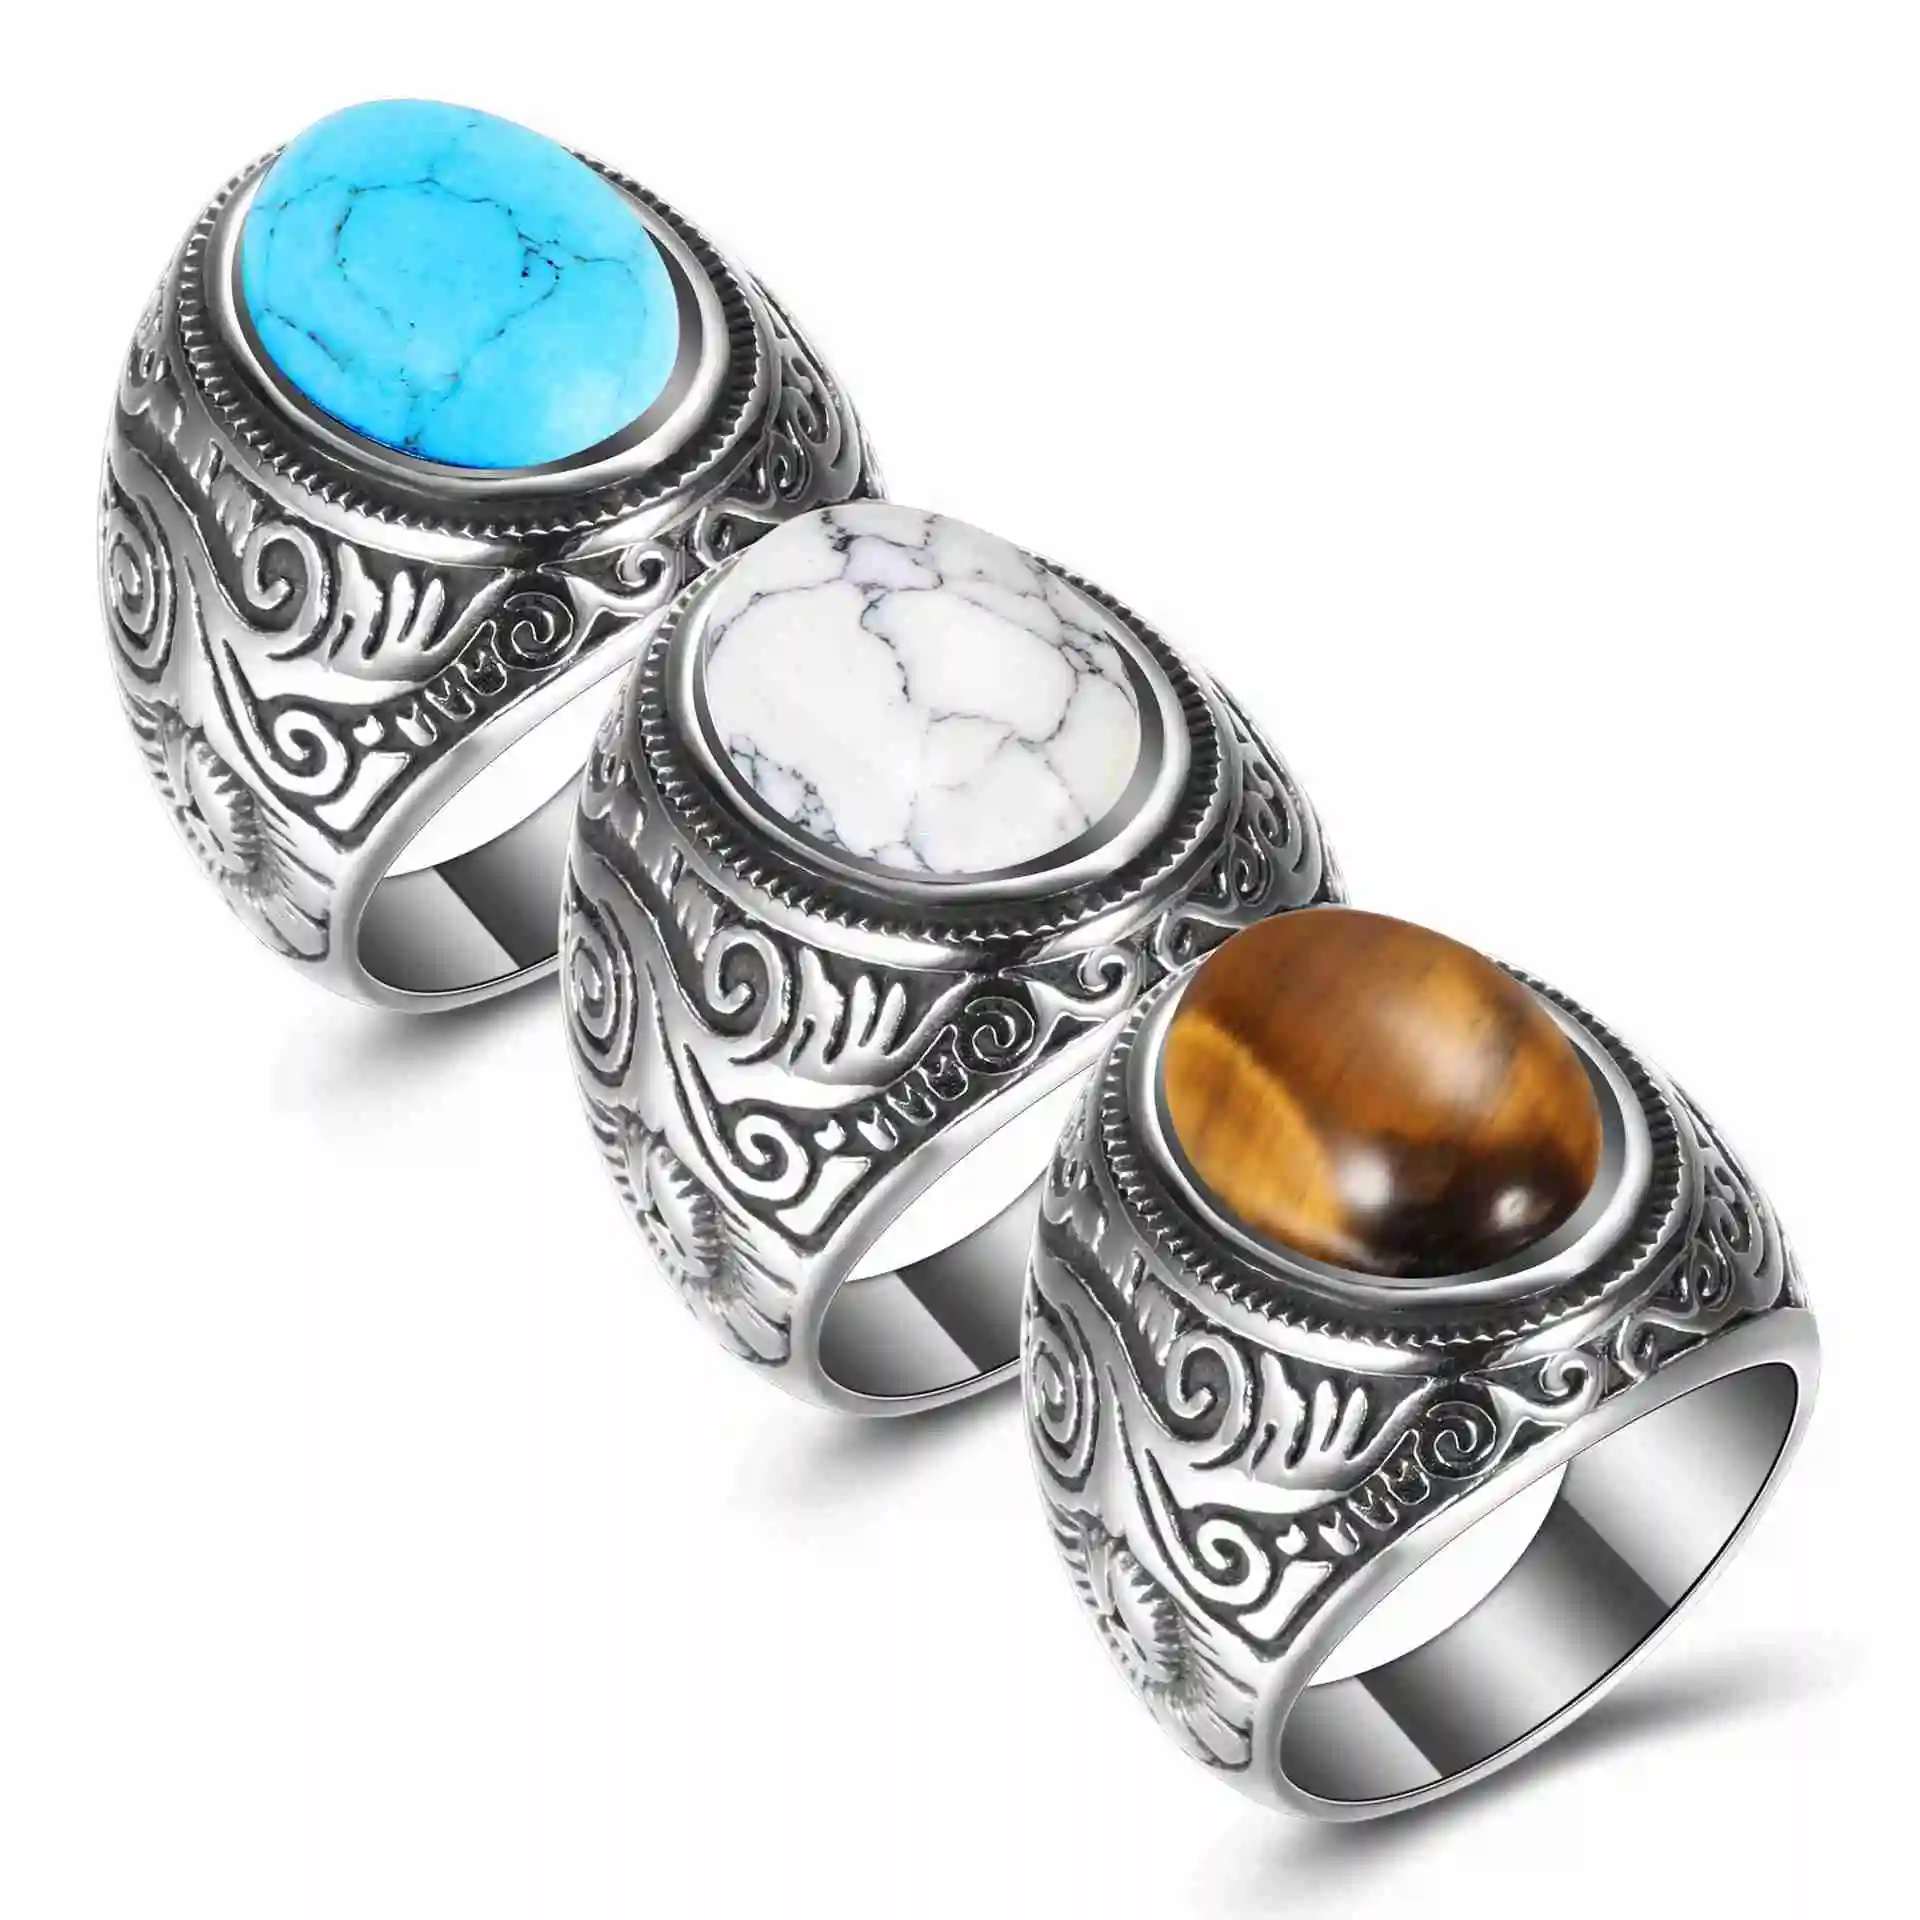 Begin type Almachtig Custom Fashion Man Punk Jewelry Turquoise Stone Stainless Steel Rings Men -  Buy Rings Men,Stainless Steel Rings For Men,Ring For Men Turquoise Product  on Alibaba.com